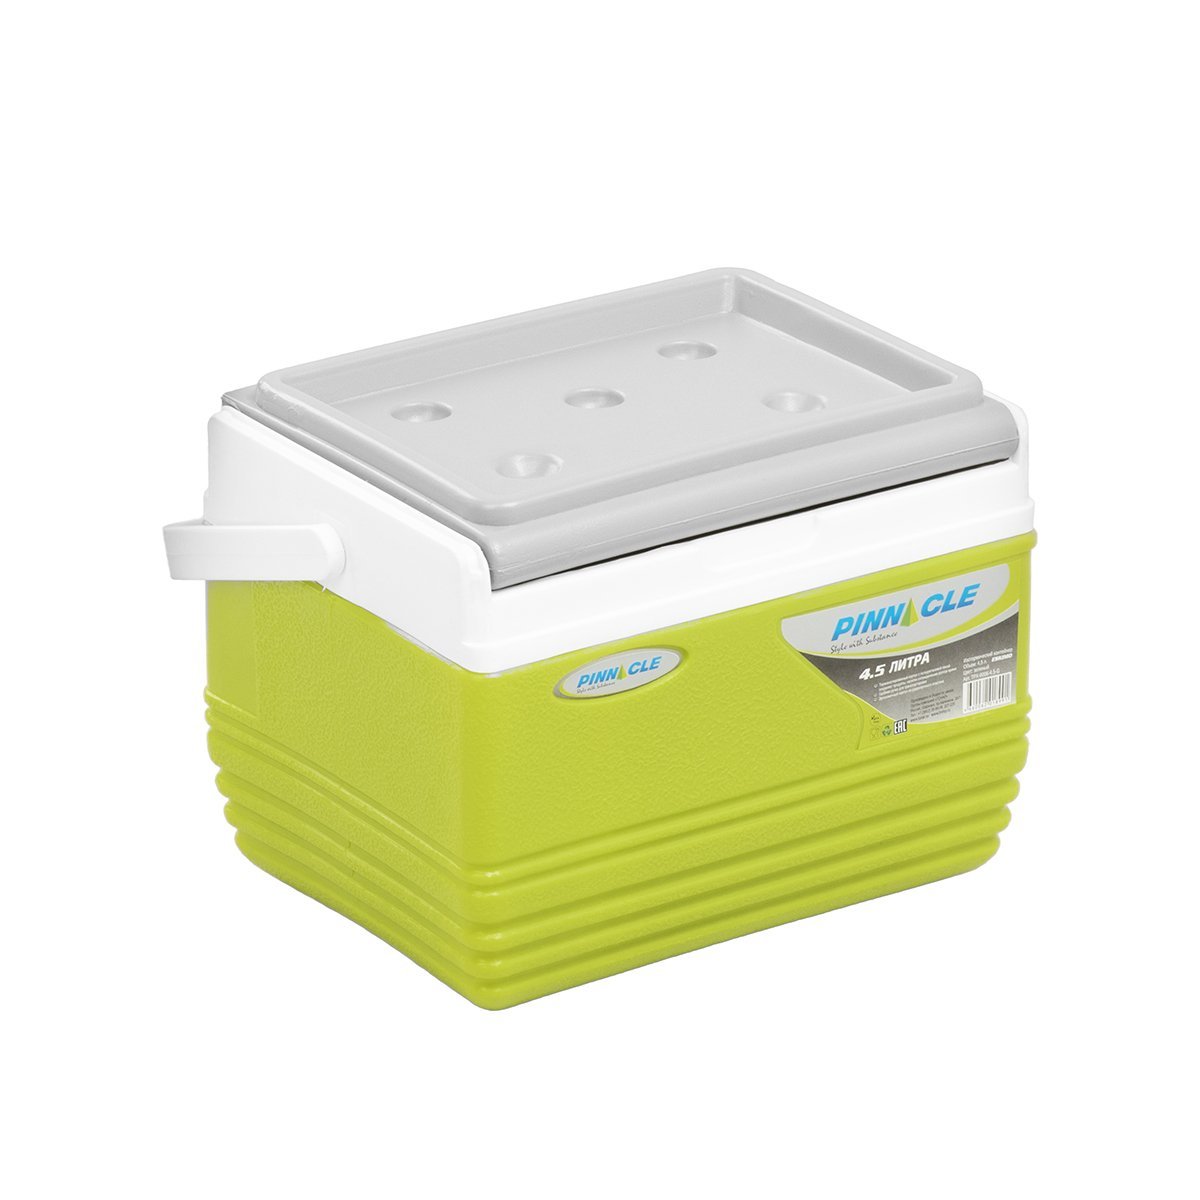 Eskimo Portable Hard-Sided Ice Chest for Camping, 4 qt, Green